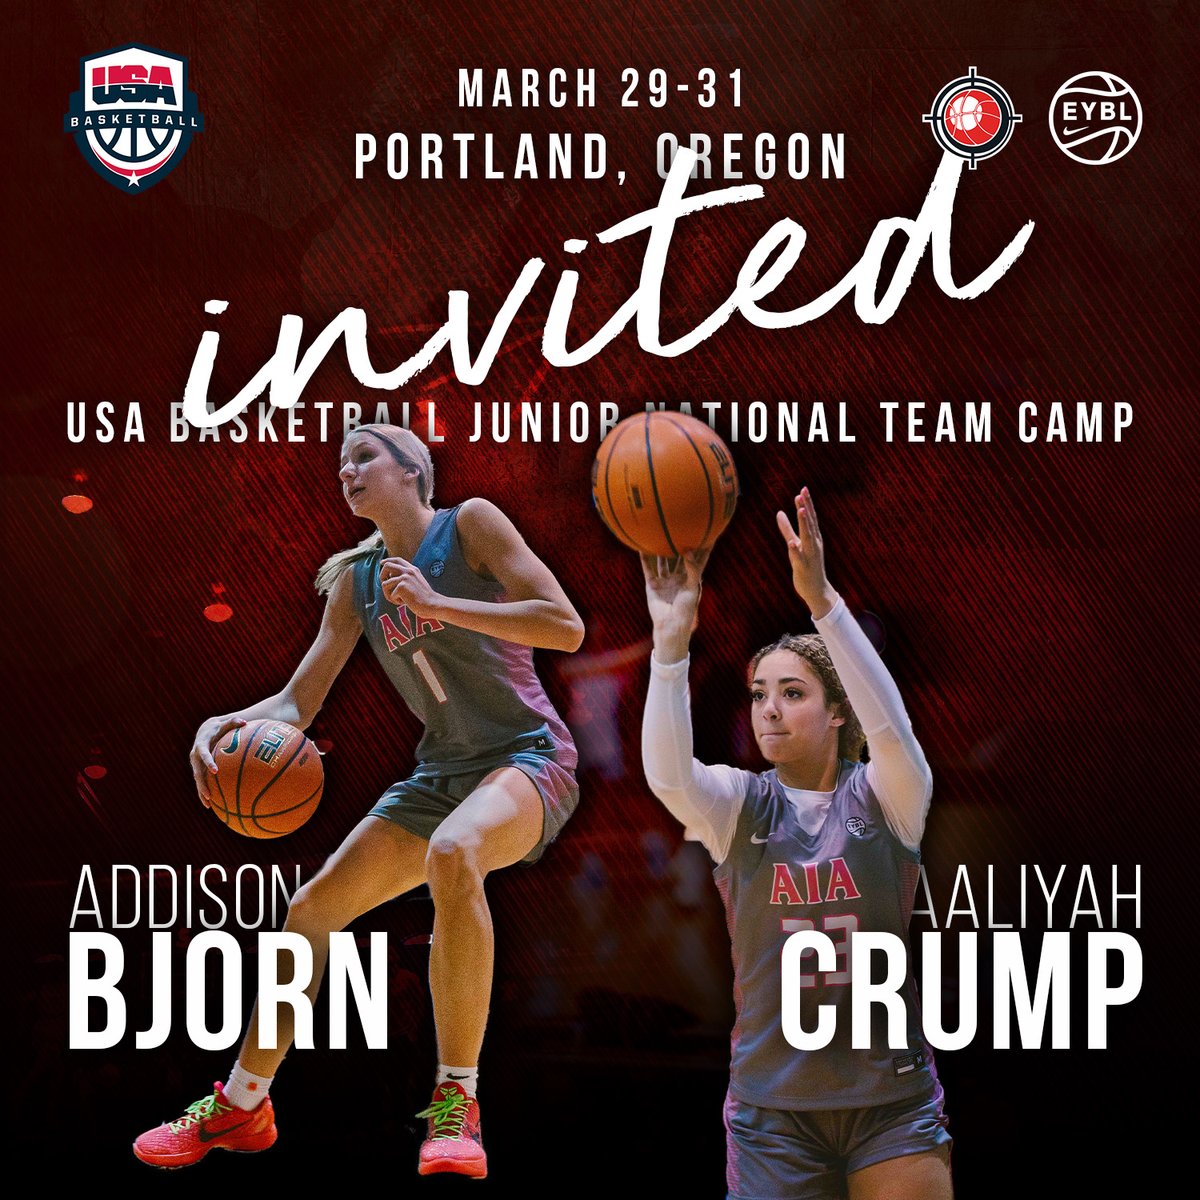 𝘼𝙄𝘼 ➡️ 𝙐𝙎𝘼𝘽 🇺🇸🏀 Congrats to '26 Addison Bjorn and '25 Aaliyah Crump on being 2 of 38 players selected to attend the 2024 USA Basketball Women's Junior National Team minicamp‼️ #AttackFamily #ChampionshipCulture